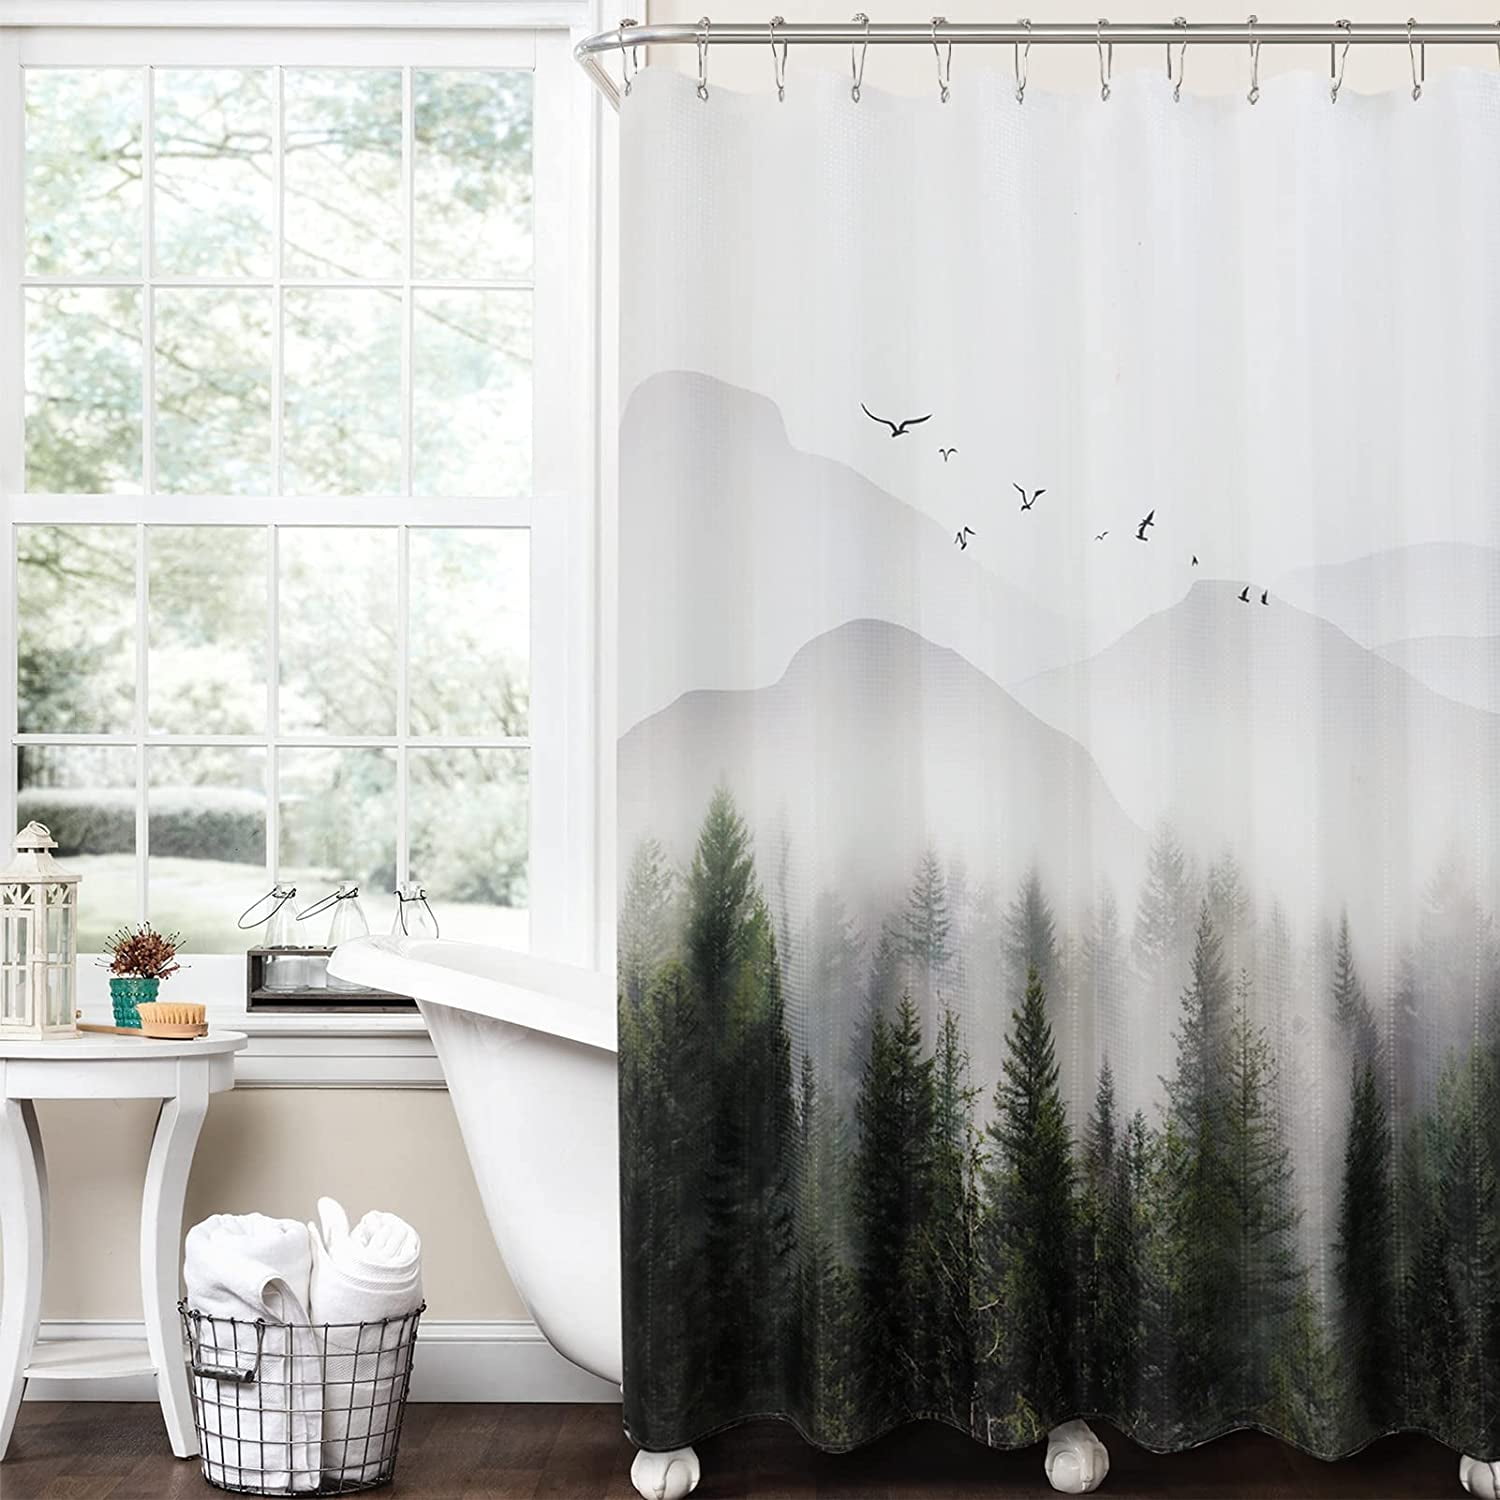 71 x 74 Decorative Shower Curtain with 12 Hooks, Leaves